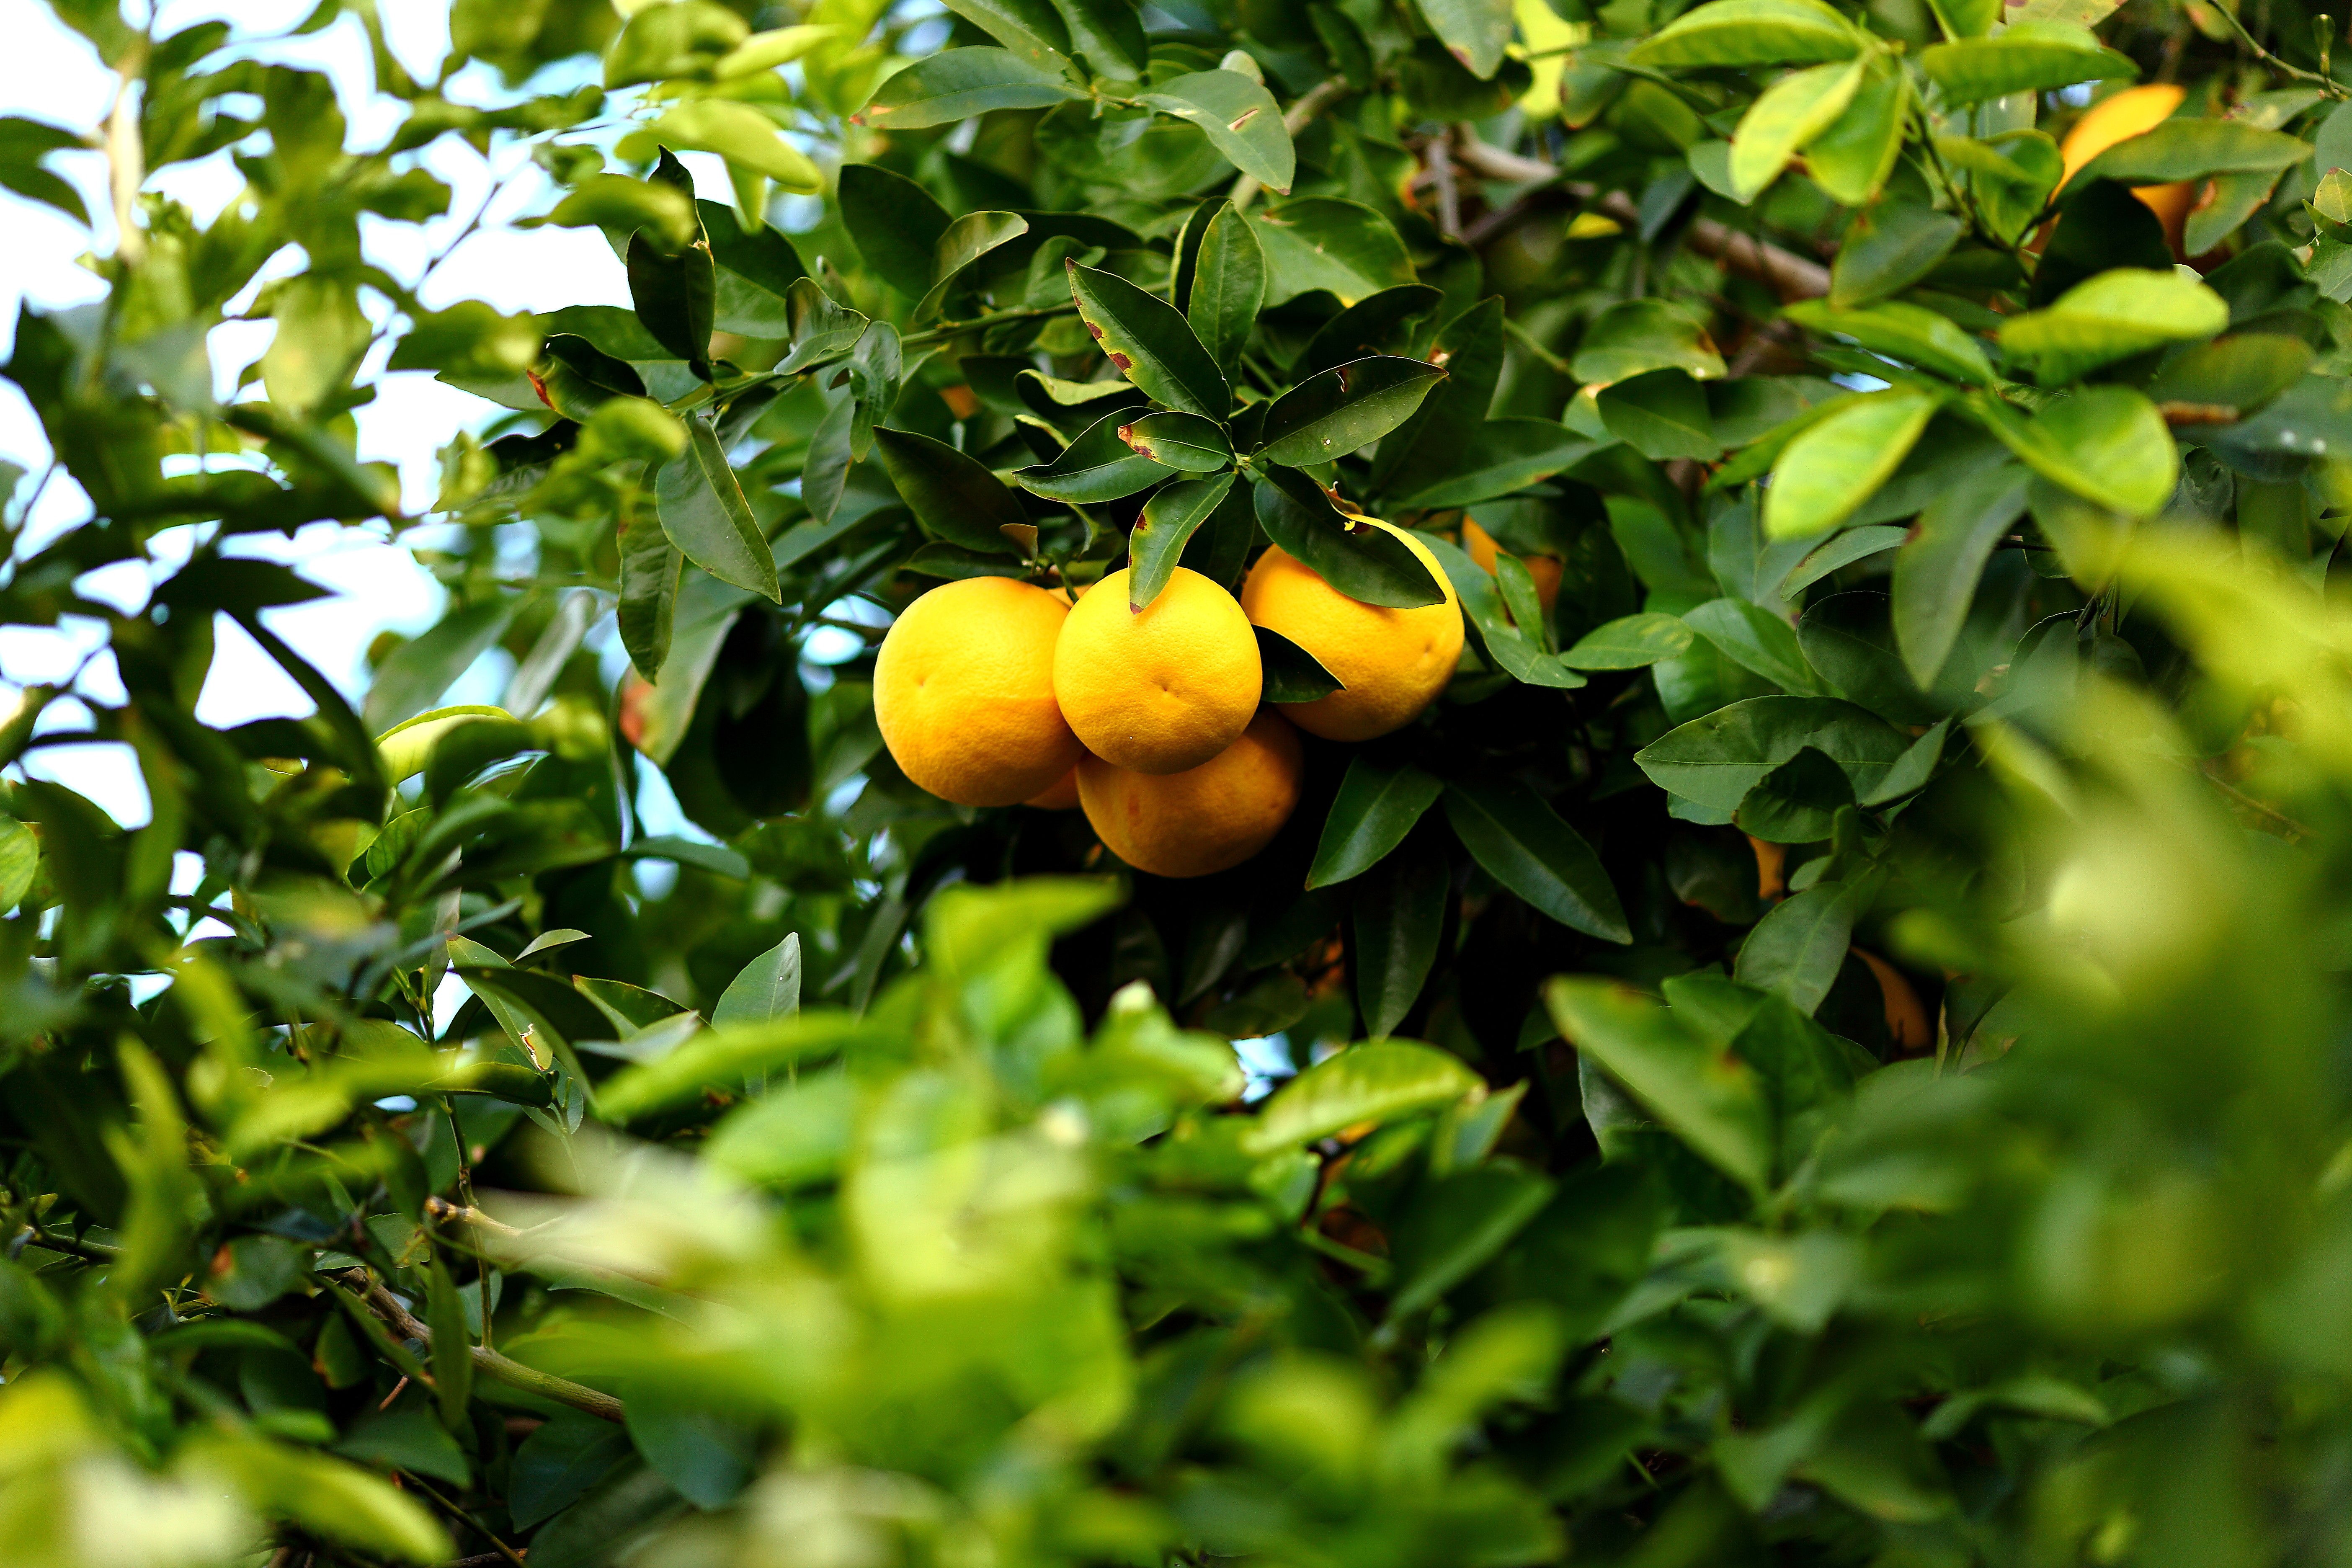 Three lemons on a branch of a tree with bright green leaves.